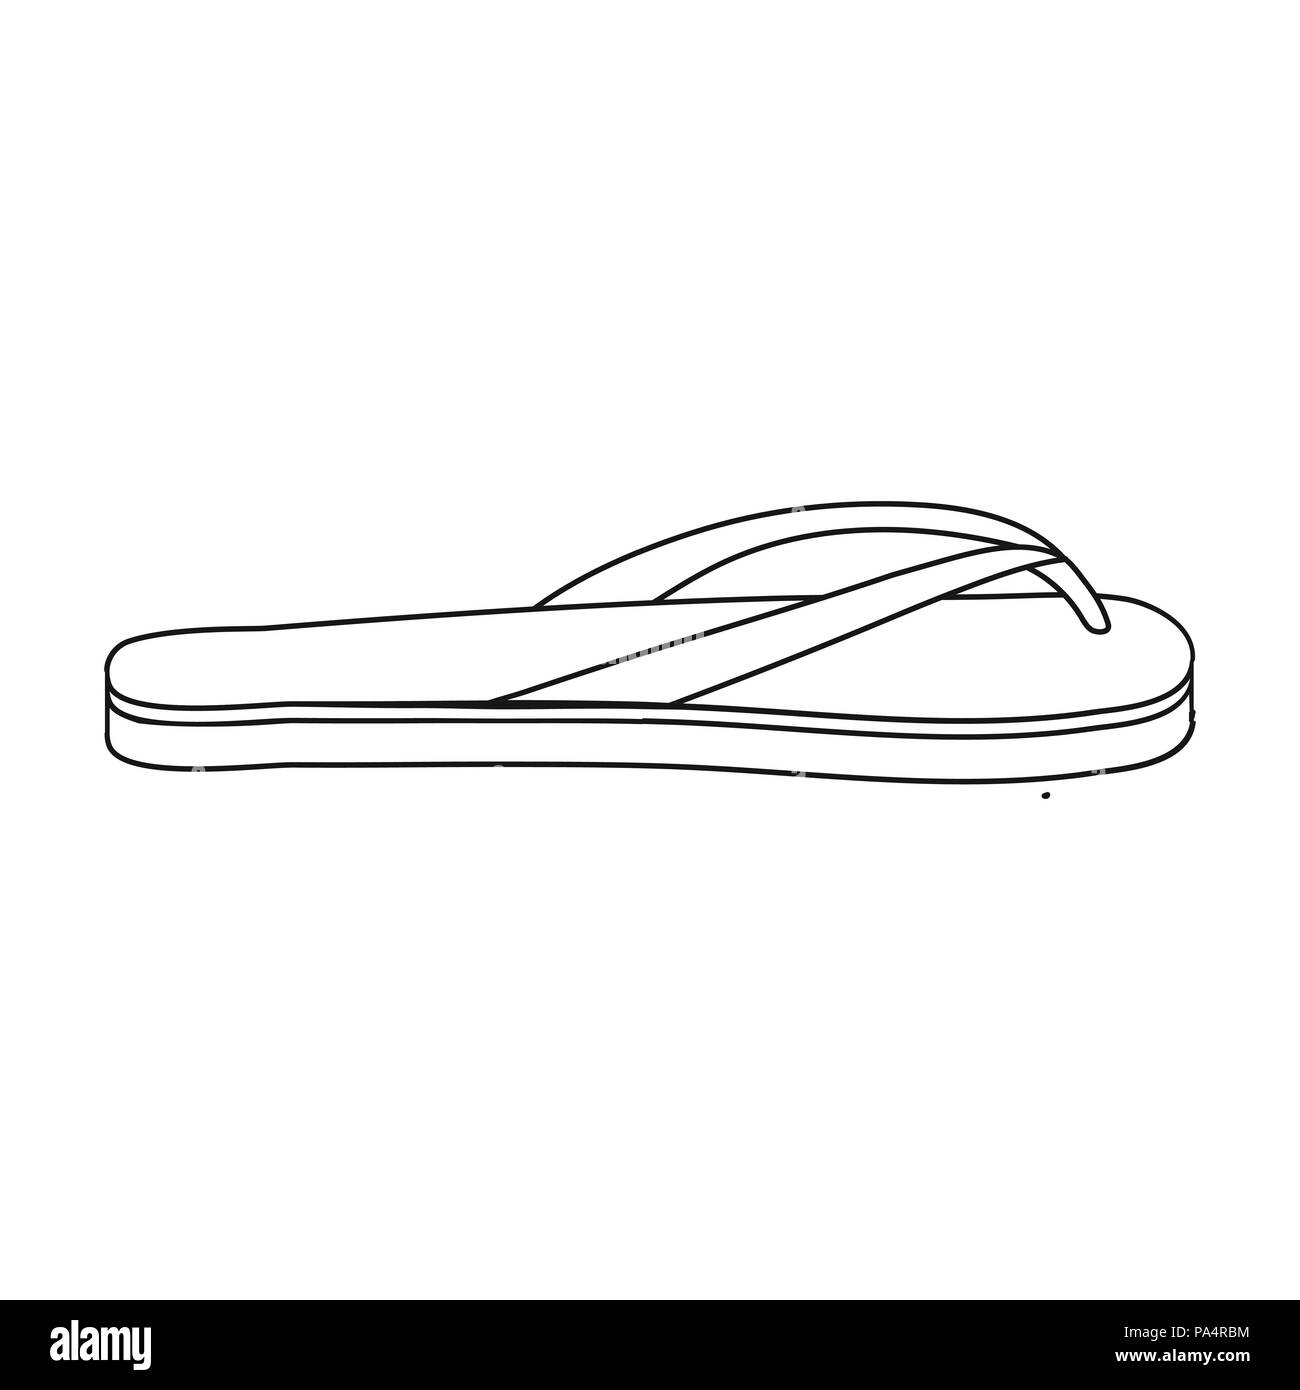 Flip-flops icon in outline style isolated on white background. Shoes symbol vector illustration. Stock Vector